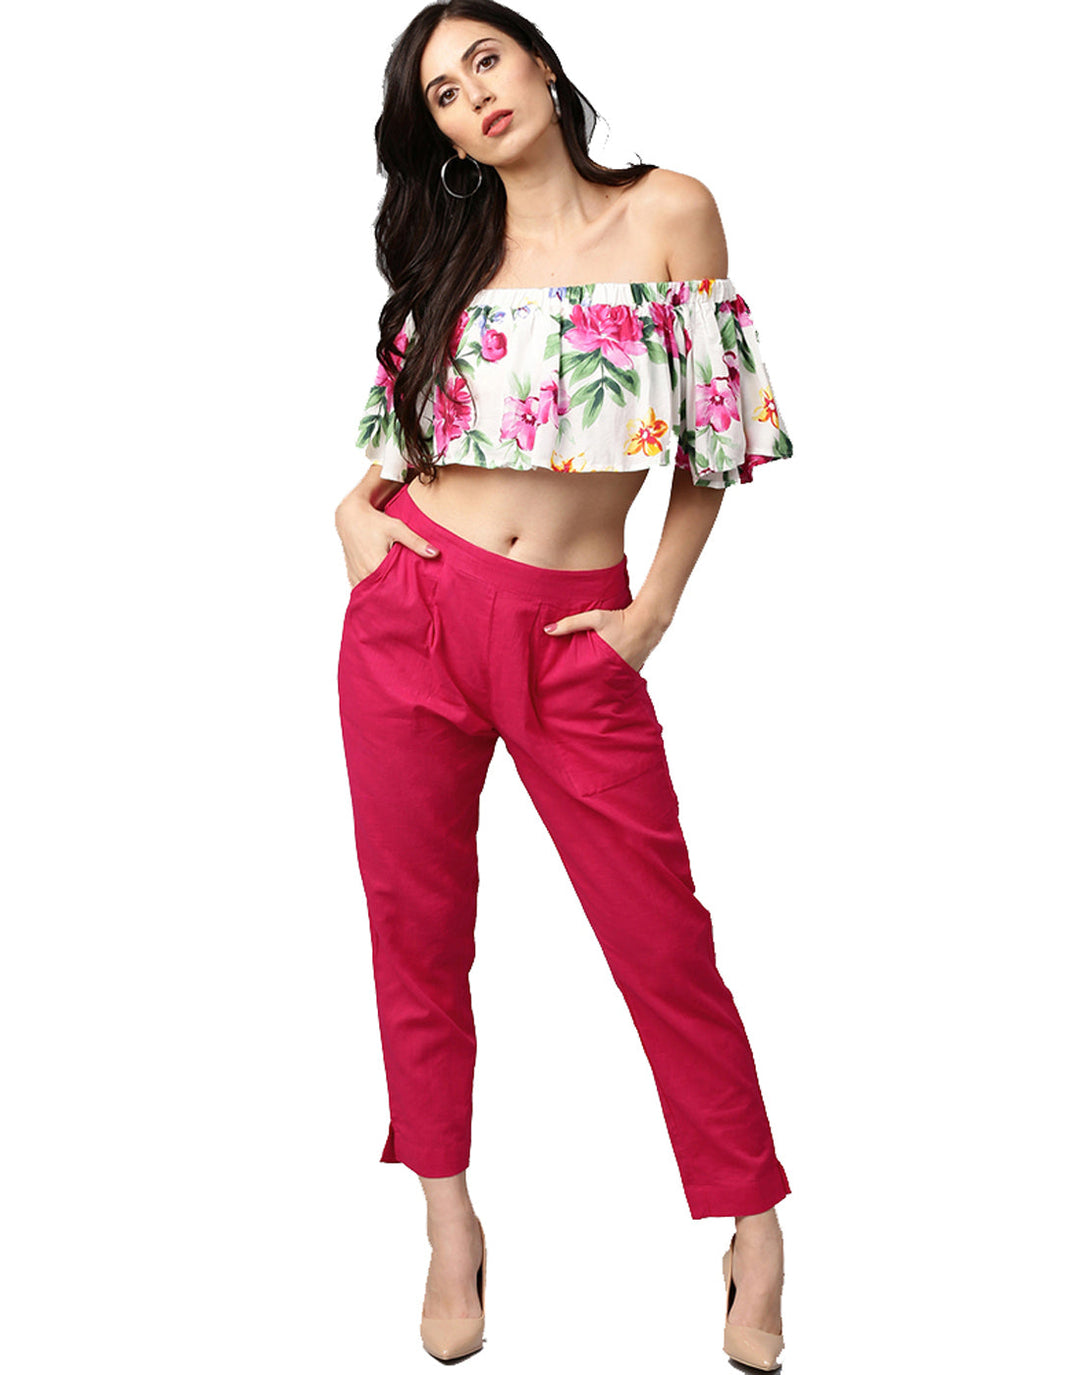 Get Ankle Length Pants for Women